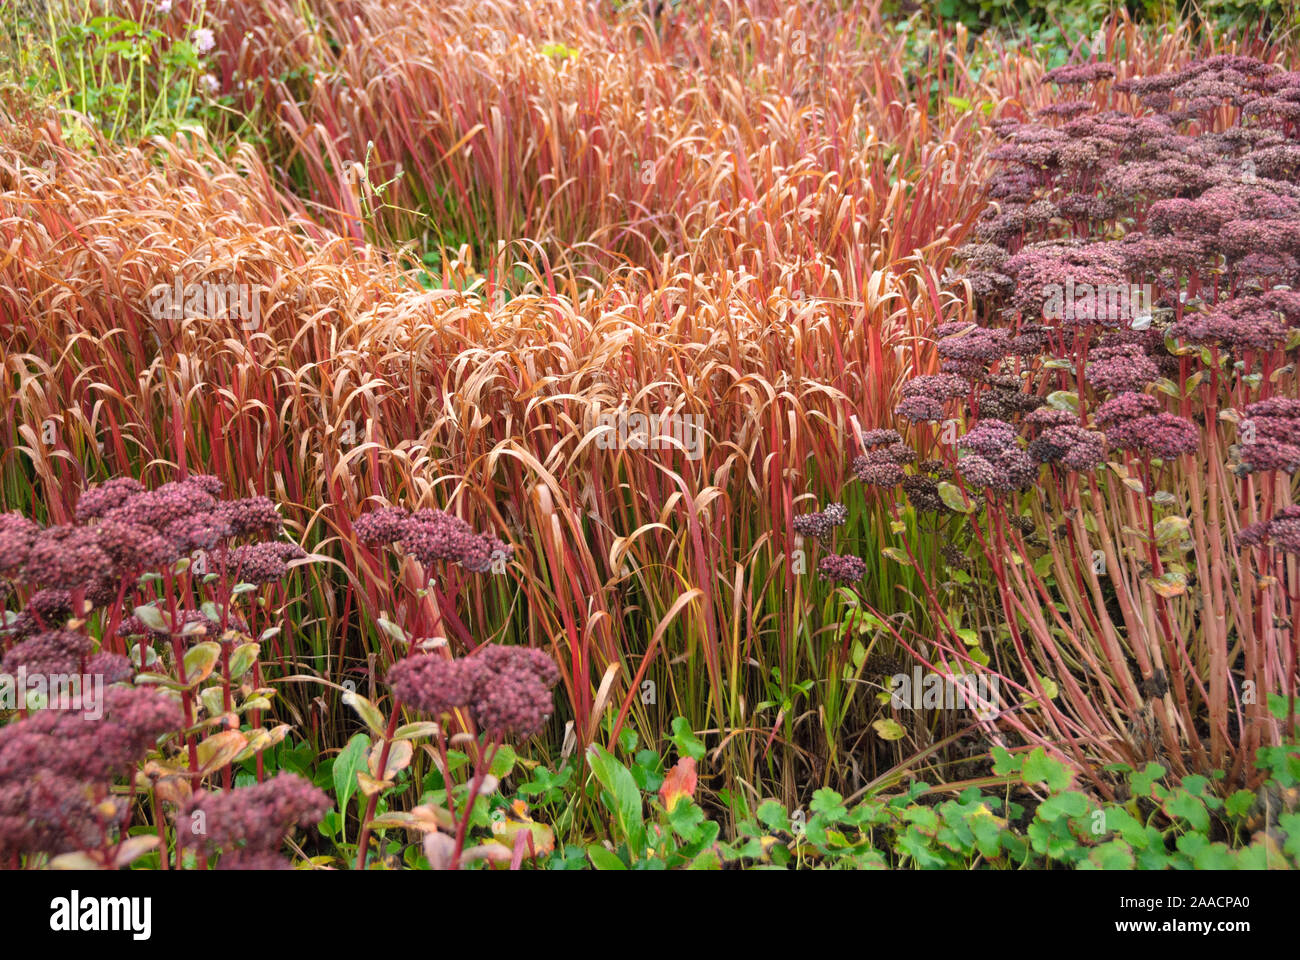 Japanisches Blutgtras (Imperata cylindrica 'Red Baron') Stock Photo